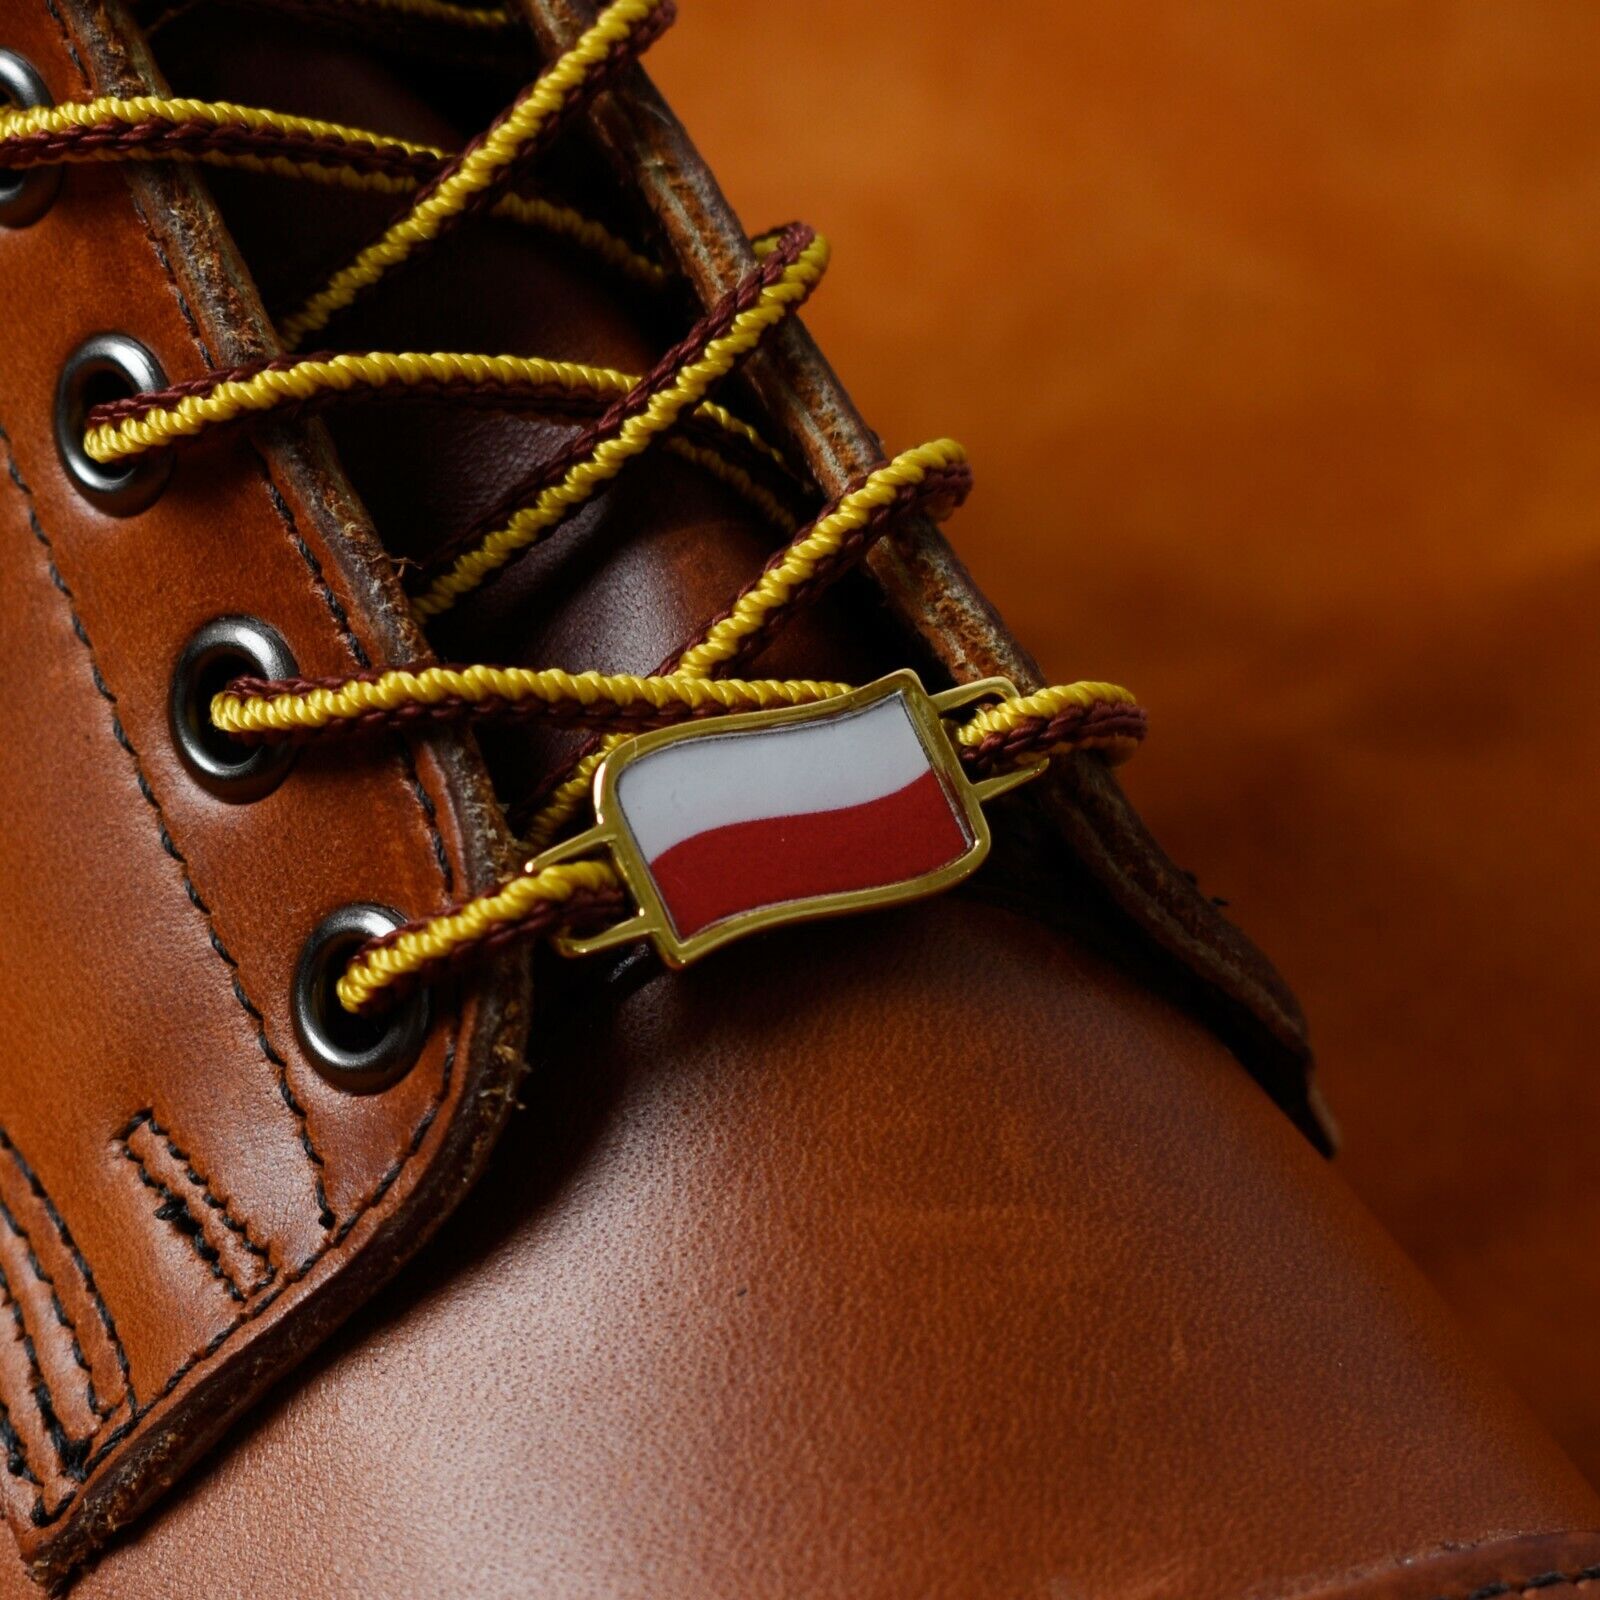 Poland Flags Shoes Boot Shoelace Keeper Holder Charm BrooklynMaker